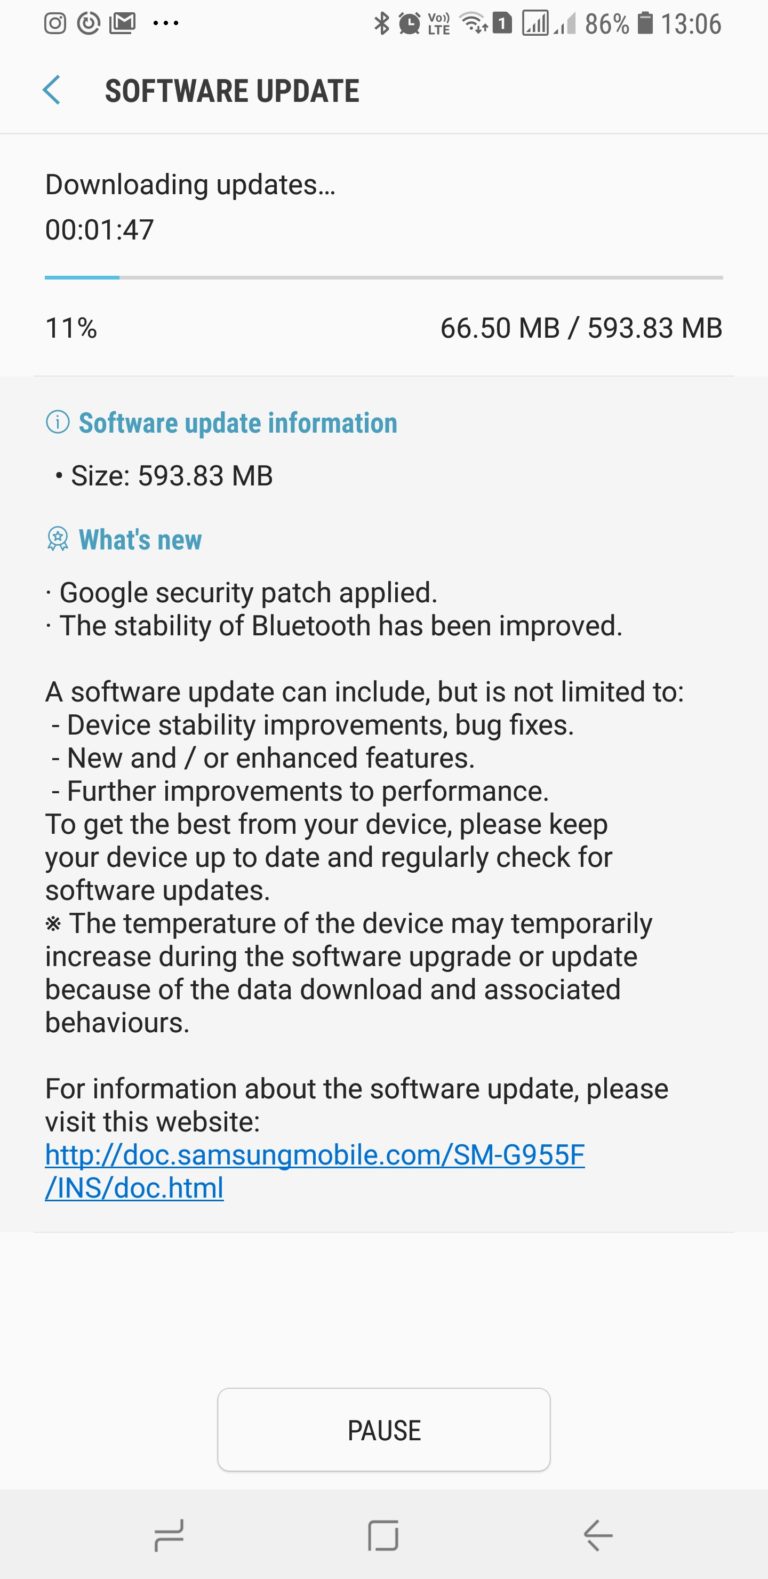 galaxy s8/s8+ receiving new android oreo beta build